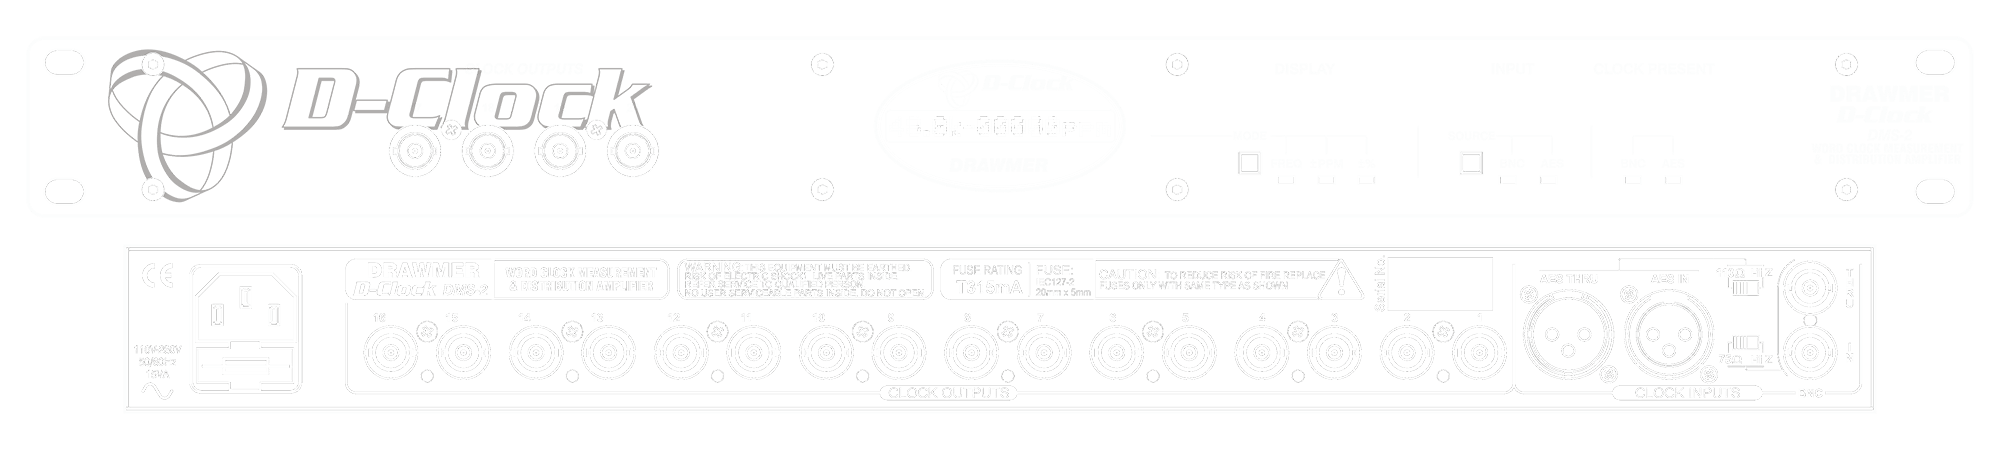 A line drawing of the front and rear panels of the D-Clock showing controls and connectors